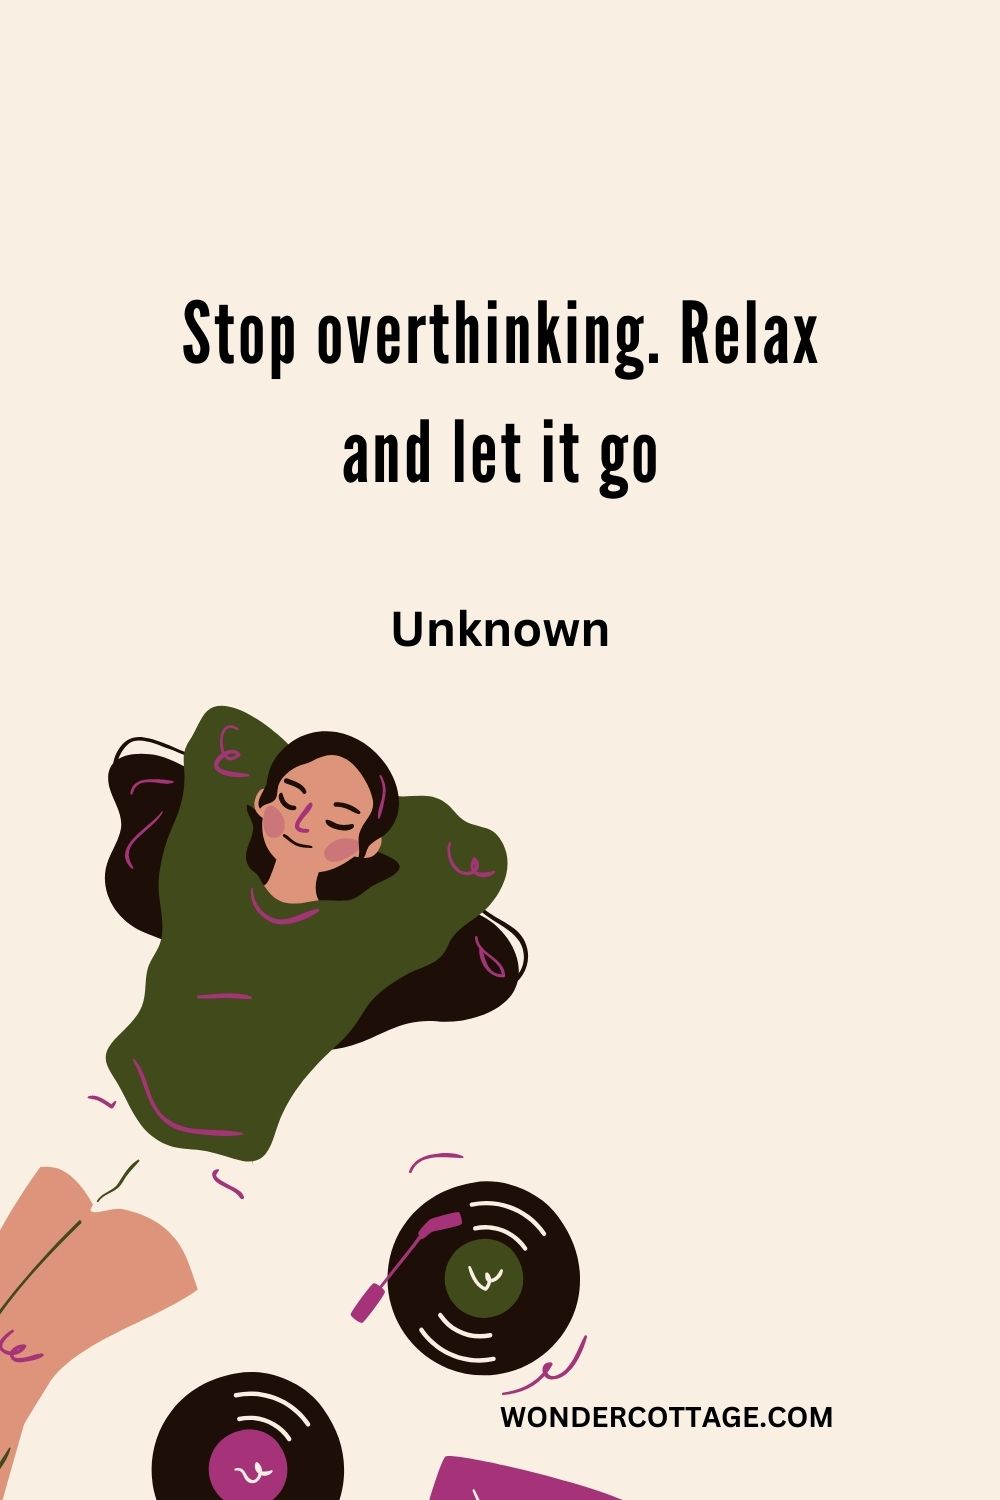 Stop overthinking. Relax and let it go. Unknown